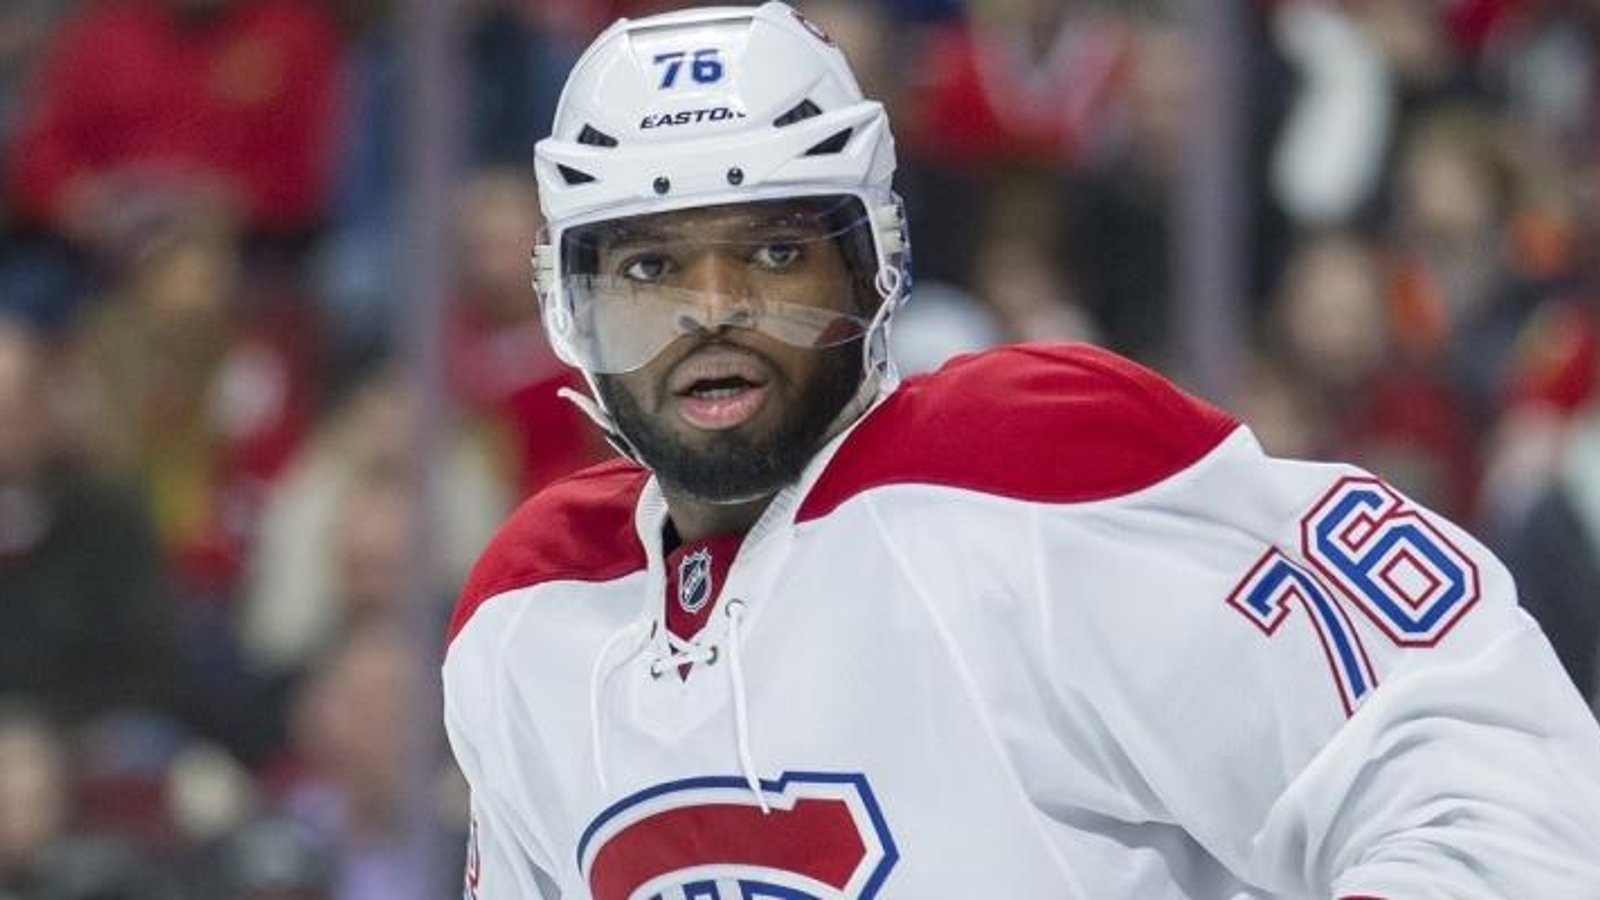 Habs coach throws P.K. Subban under the bus after another loss.